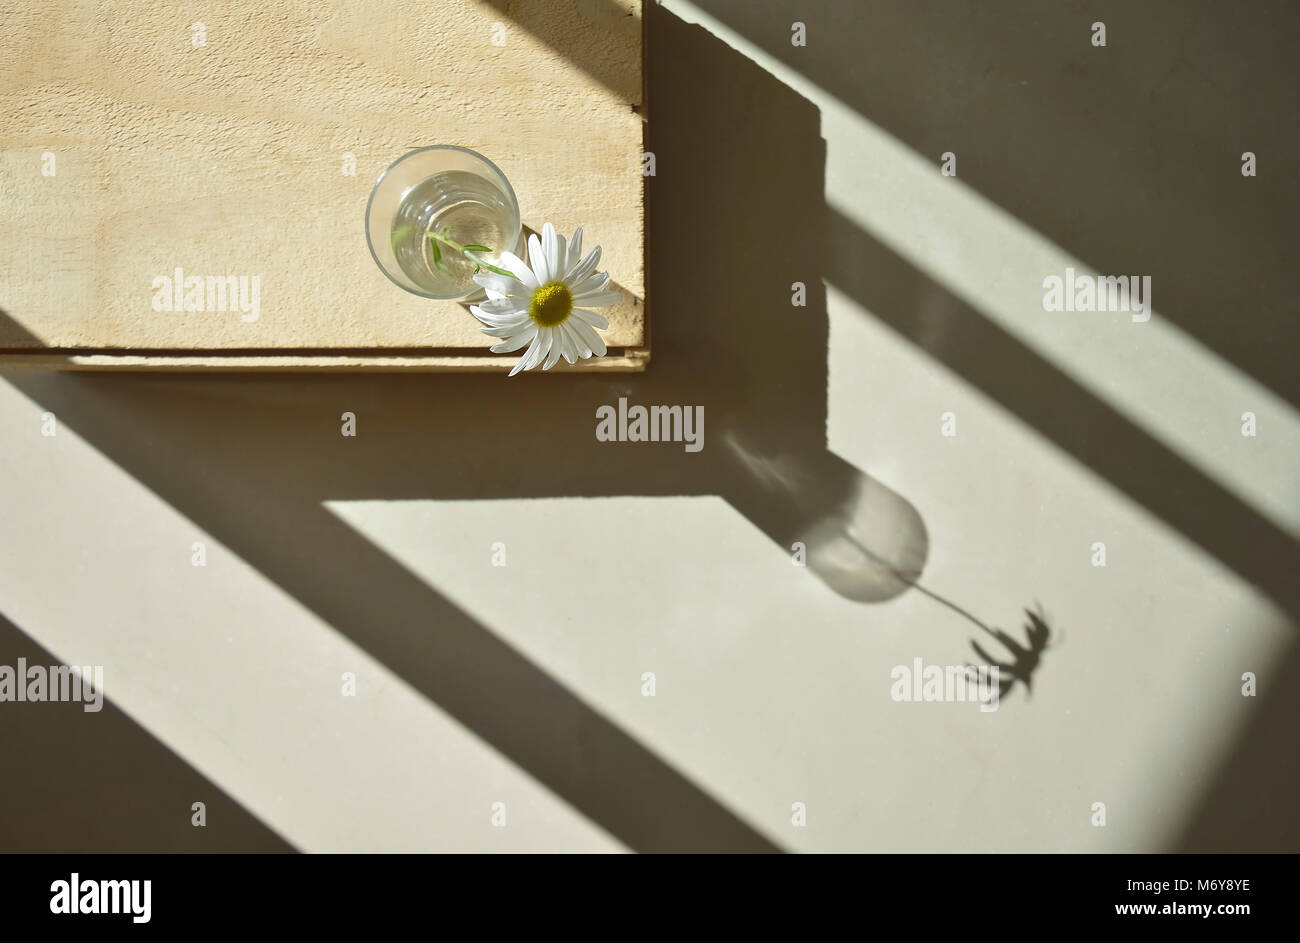 Daisy flower in a glass by the window casting its shadow on the ground Stock Photo